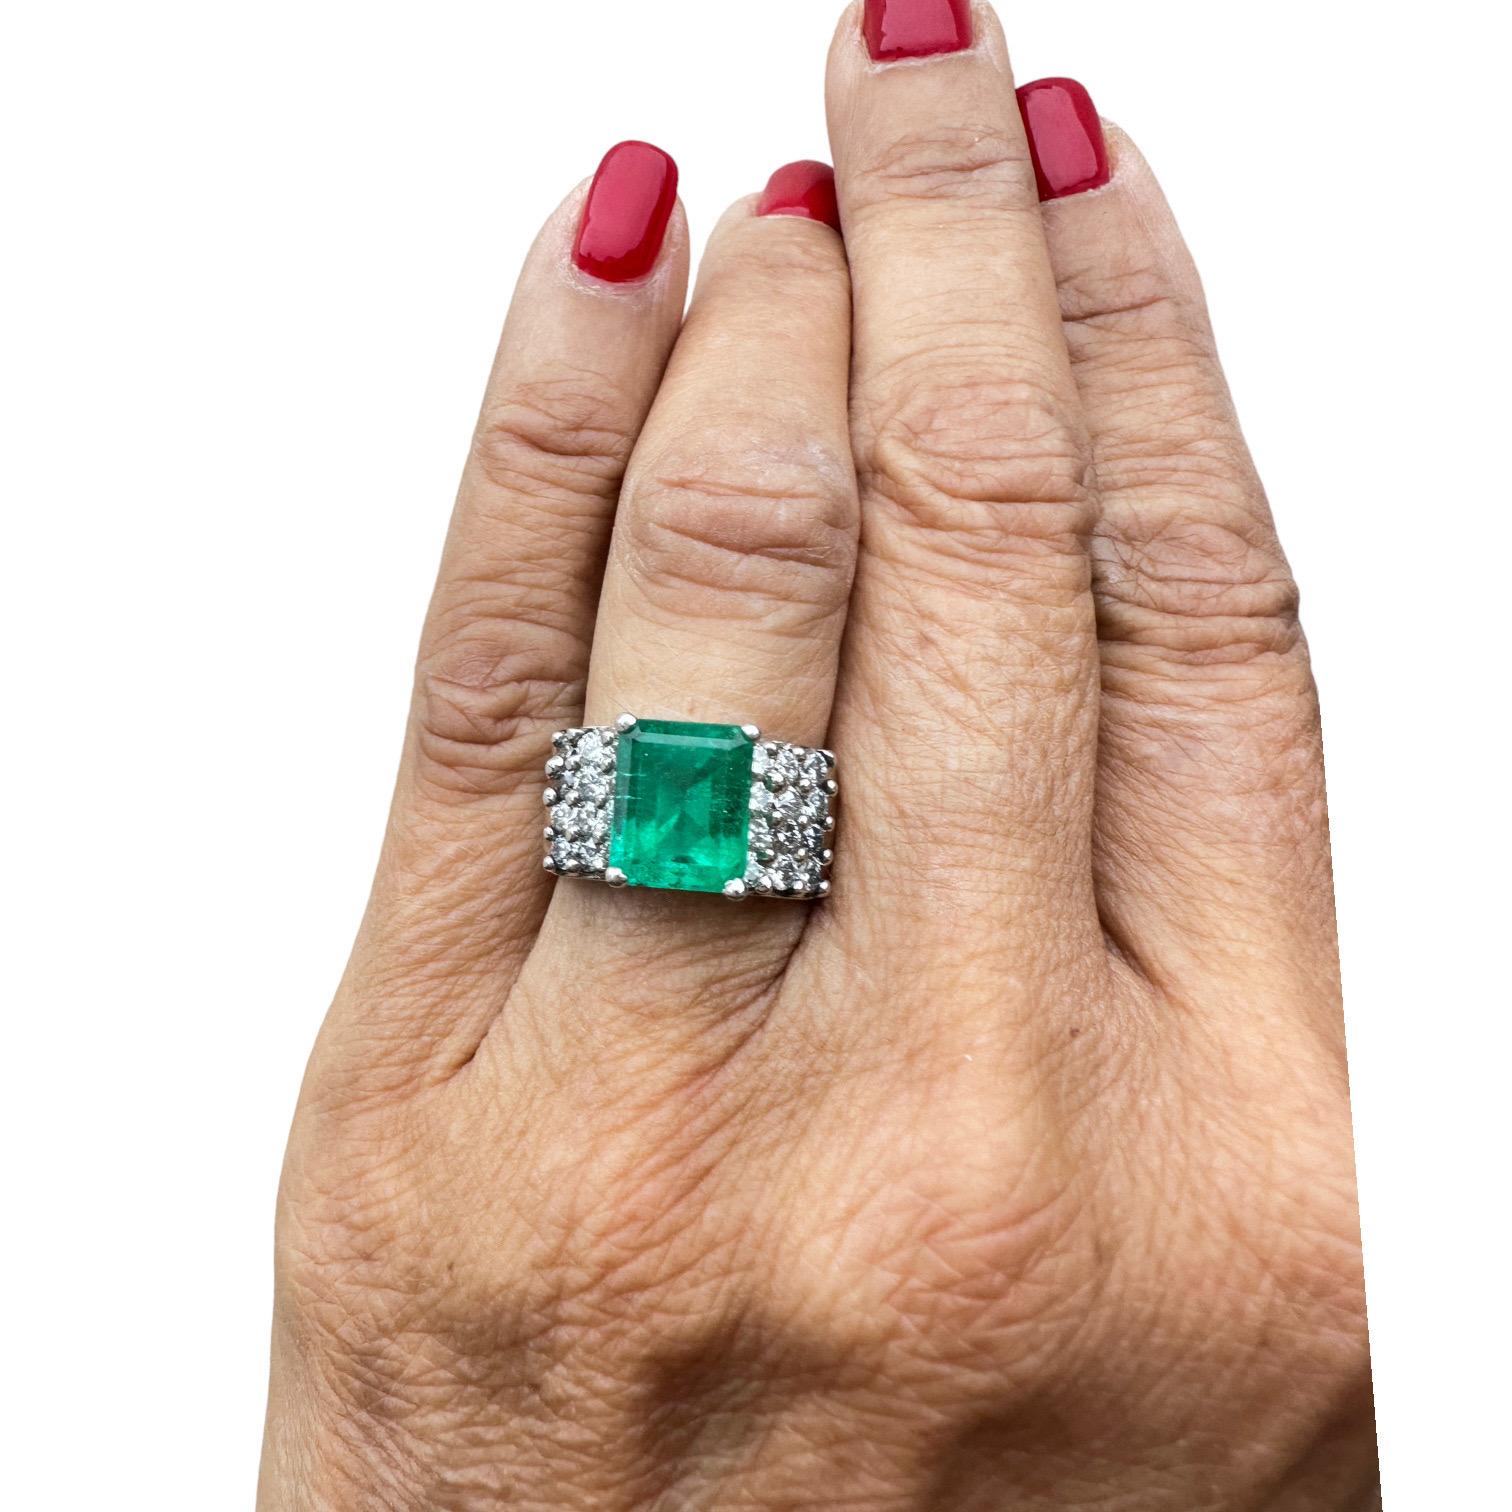 Emerald Cut 4.00 Carat Colombian Emerald and Diamond Ring 18kt. White Gold VS Quality For Sale